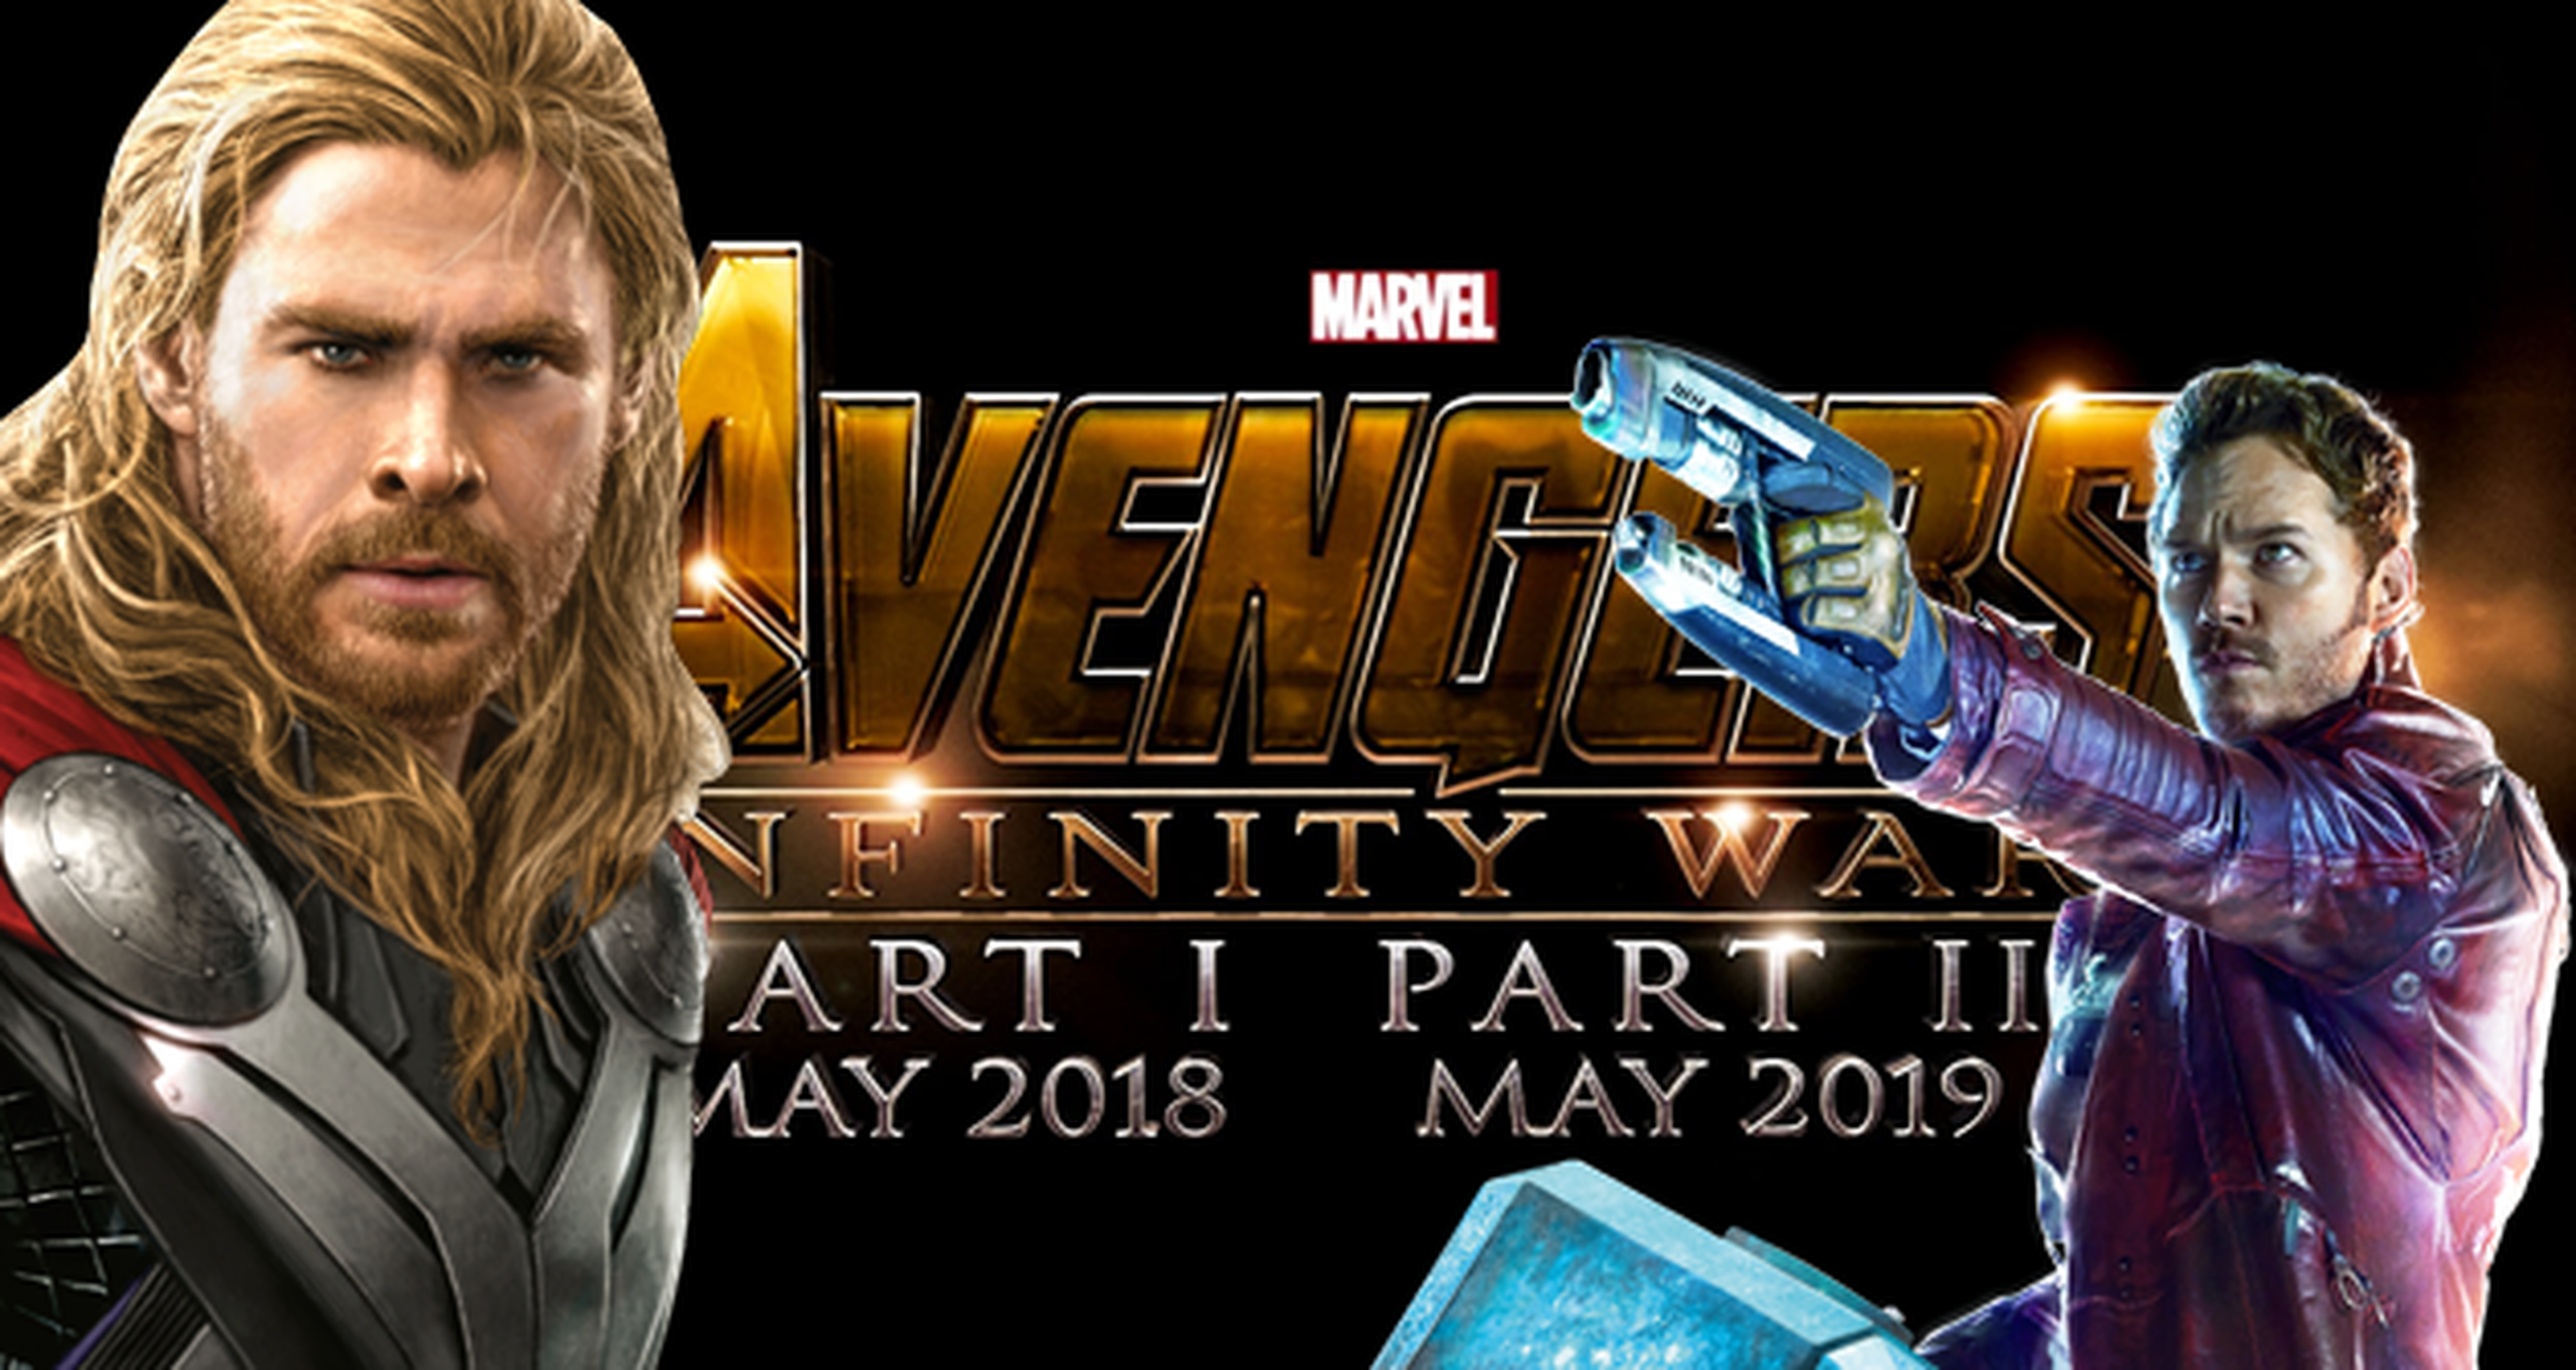 Avengers: Infinity War contará con Thor y Star-Lord